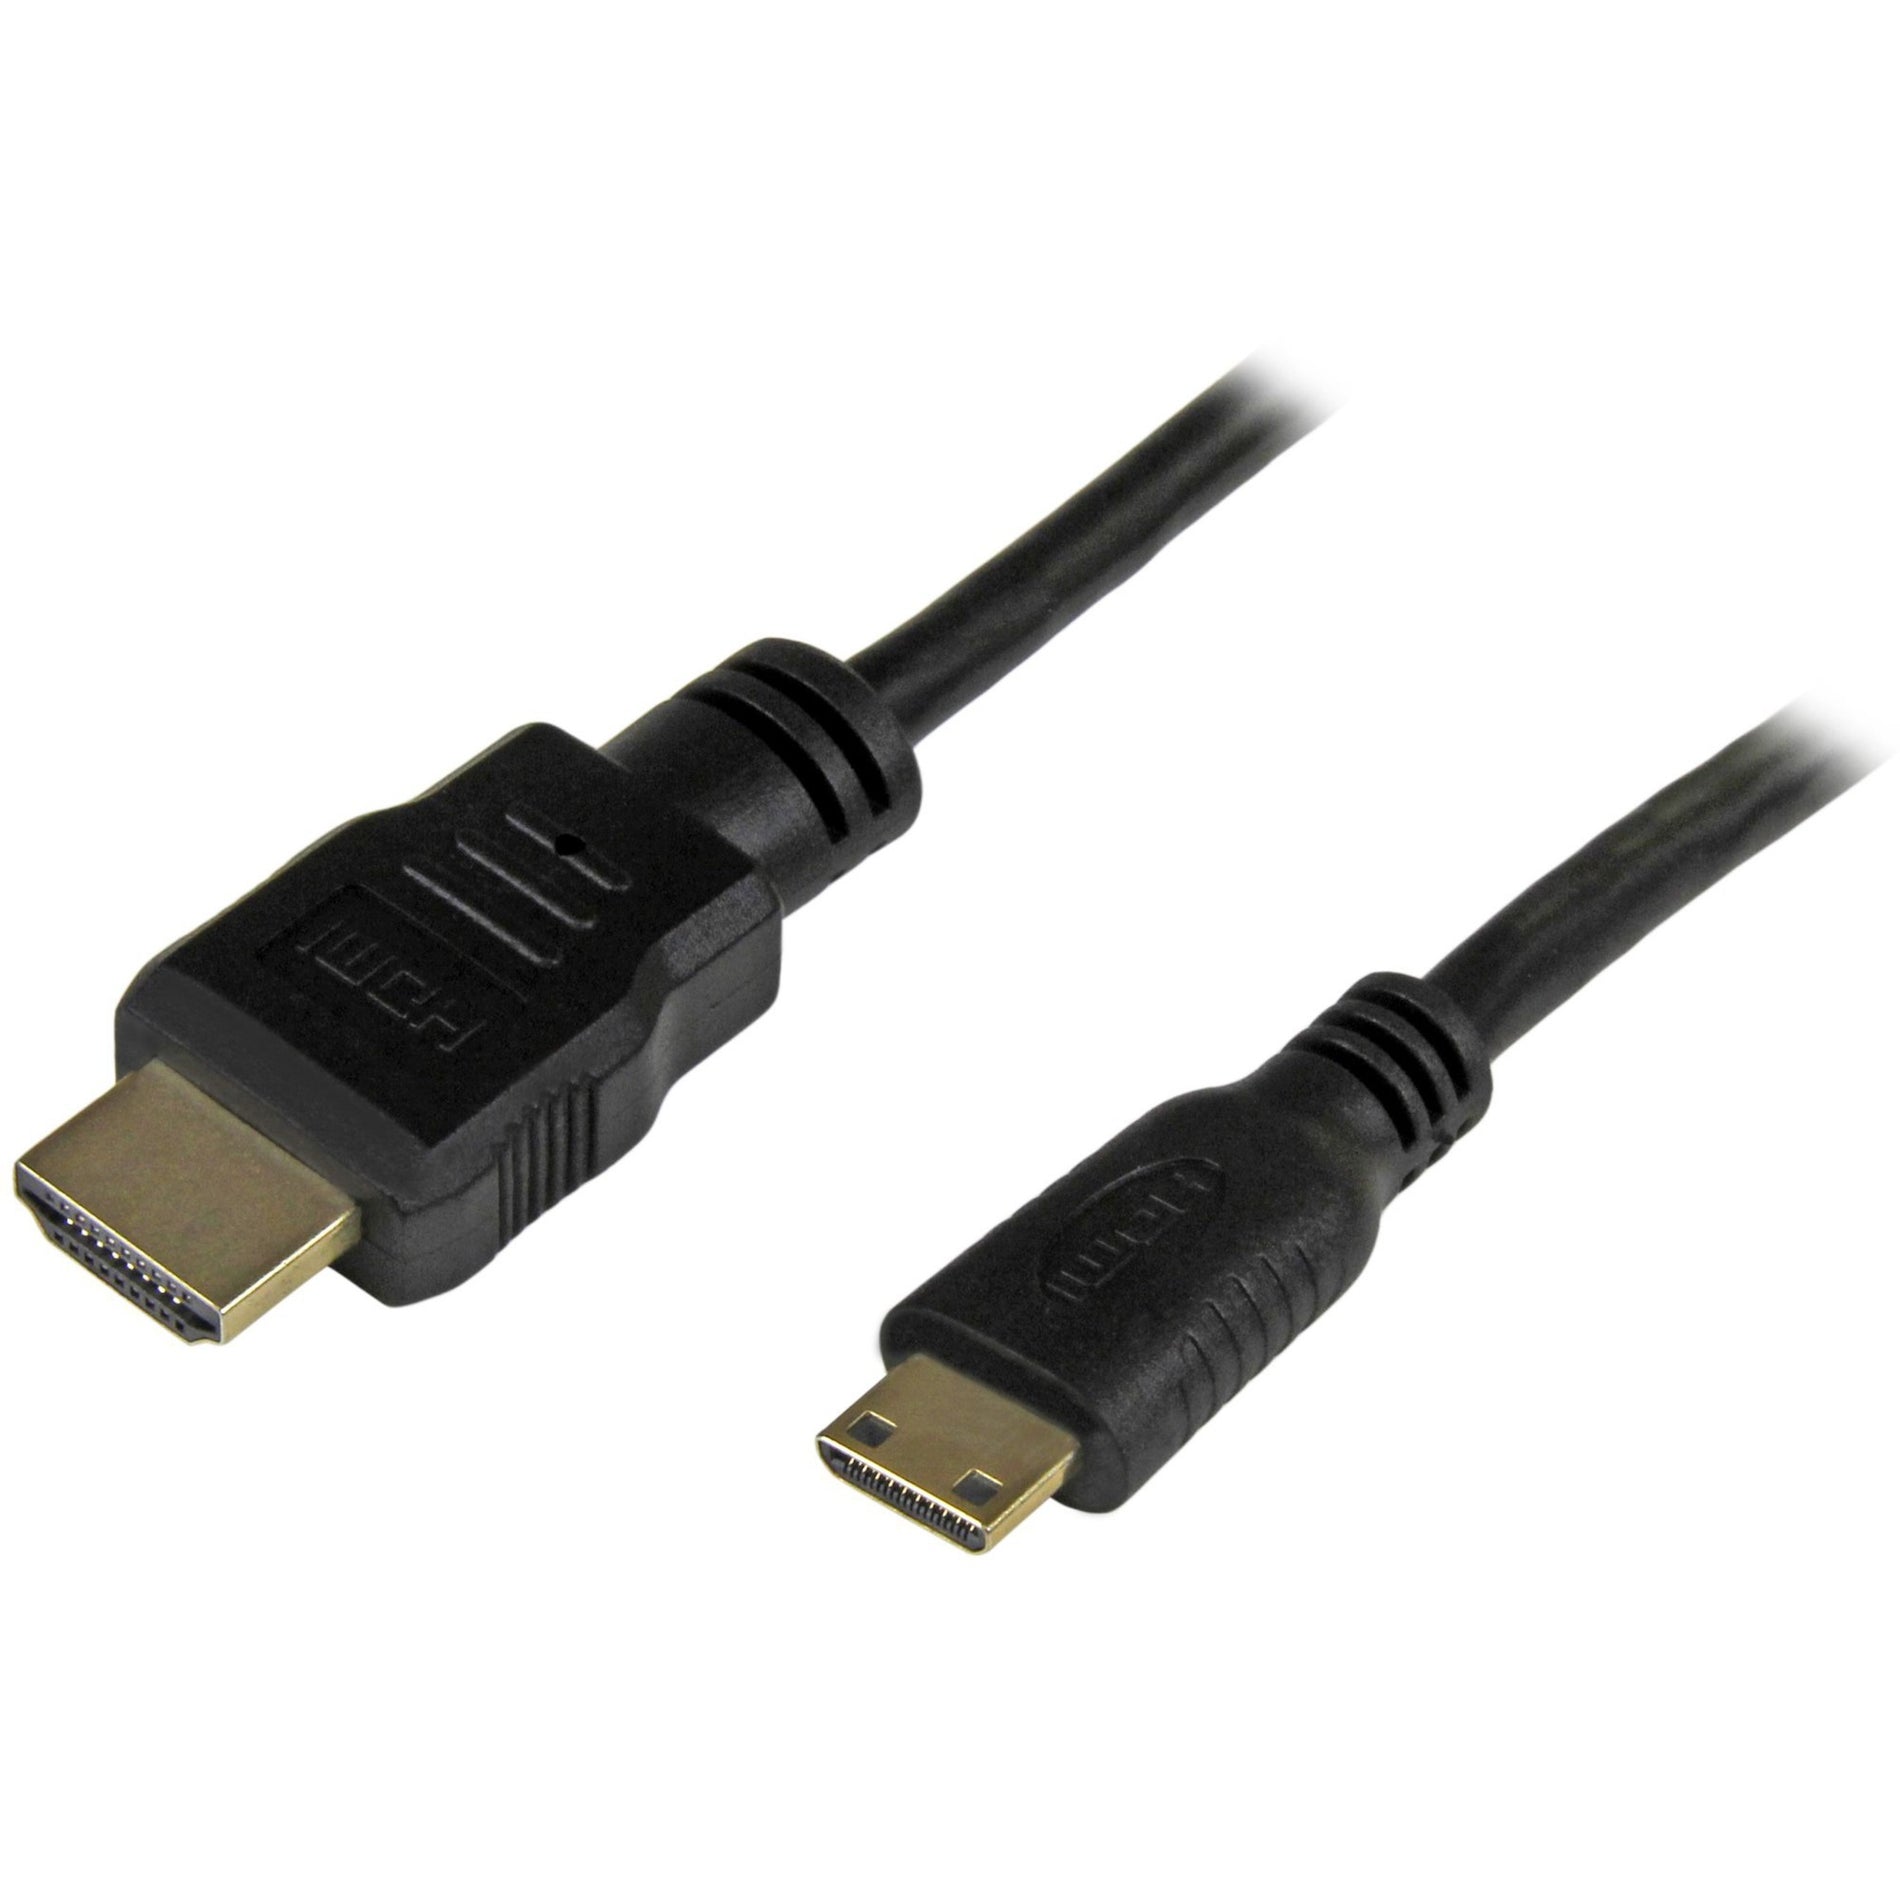 StarTech.com HDMIACMM6 6 ft High Speed HDMI Cable with Ethernet- HDMI to HDMI Mini- M/M, Compact and Portable Video Cable Adapter